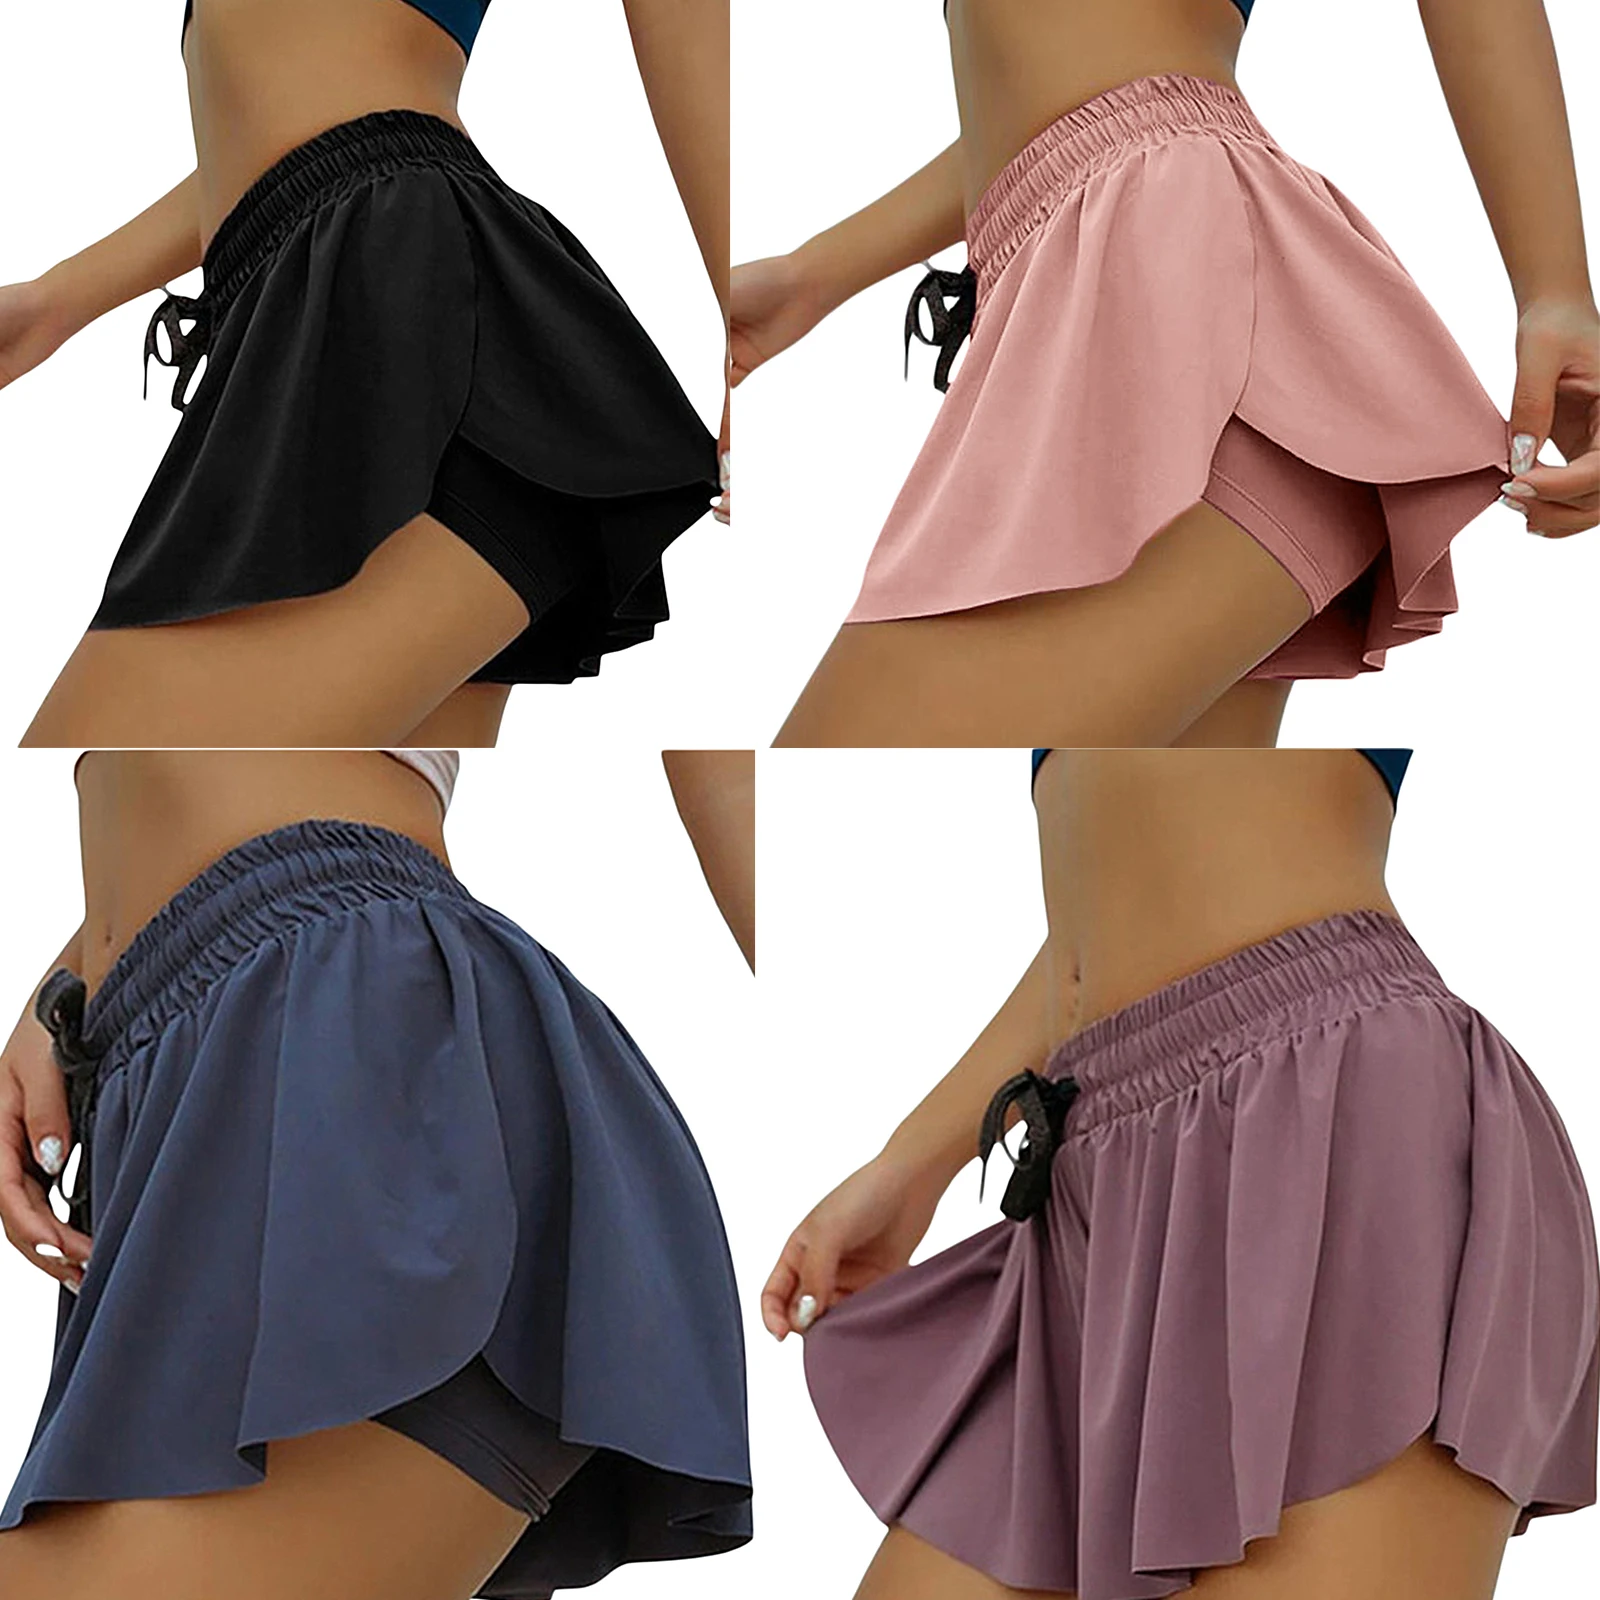 plus size womens clothing Women Simple Style Sports Skort, Female Solid Color Casual Elastic High Waist Oversize Skirt with Built-in Slip Shorts, S-XXXXXL adidas shorts